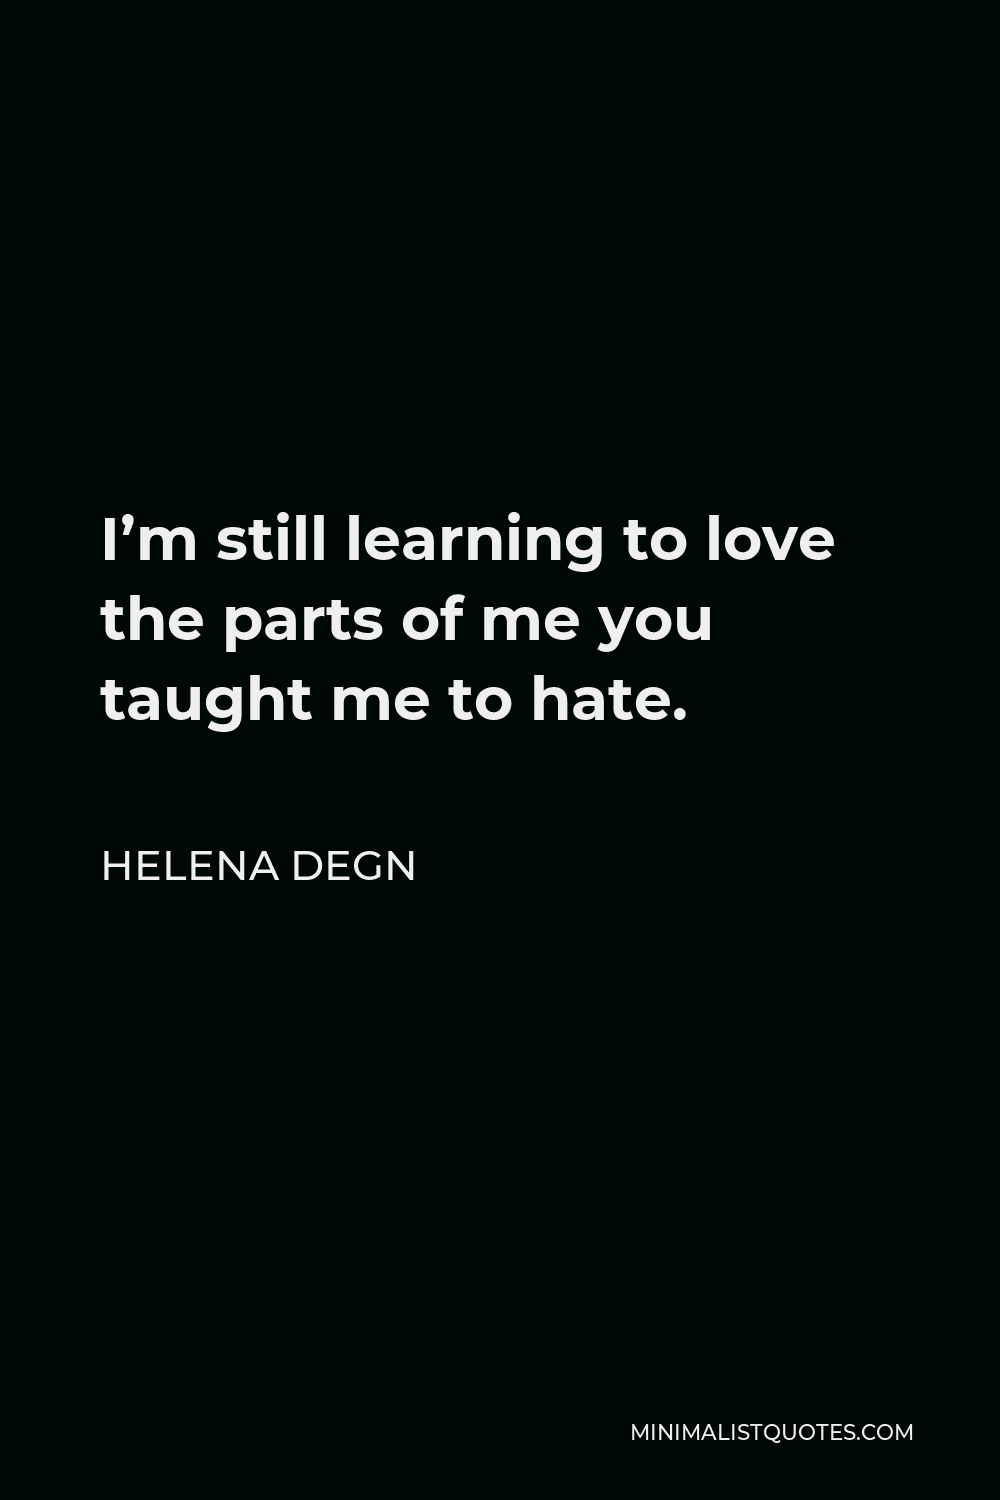 Helena Degn Quote - I’m still learning to love the parts of me you taught me to hate.